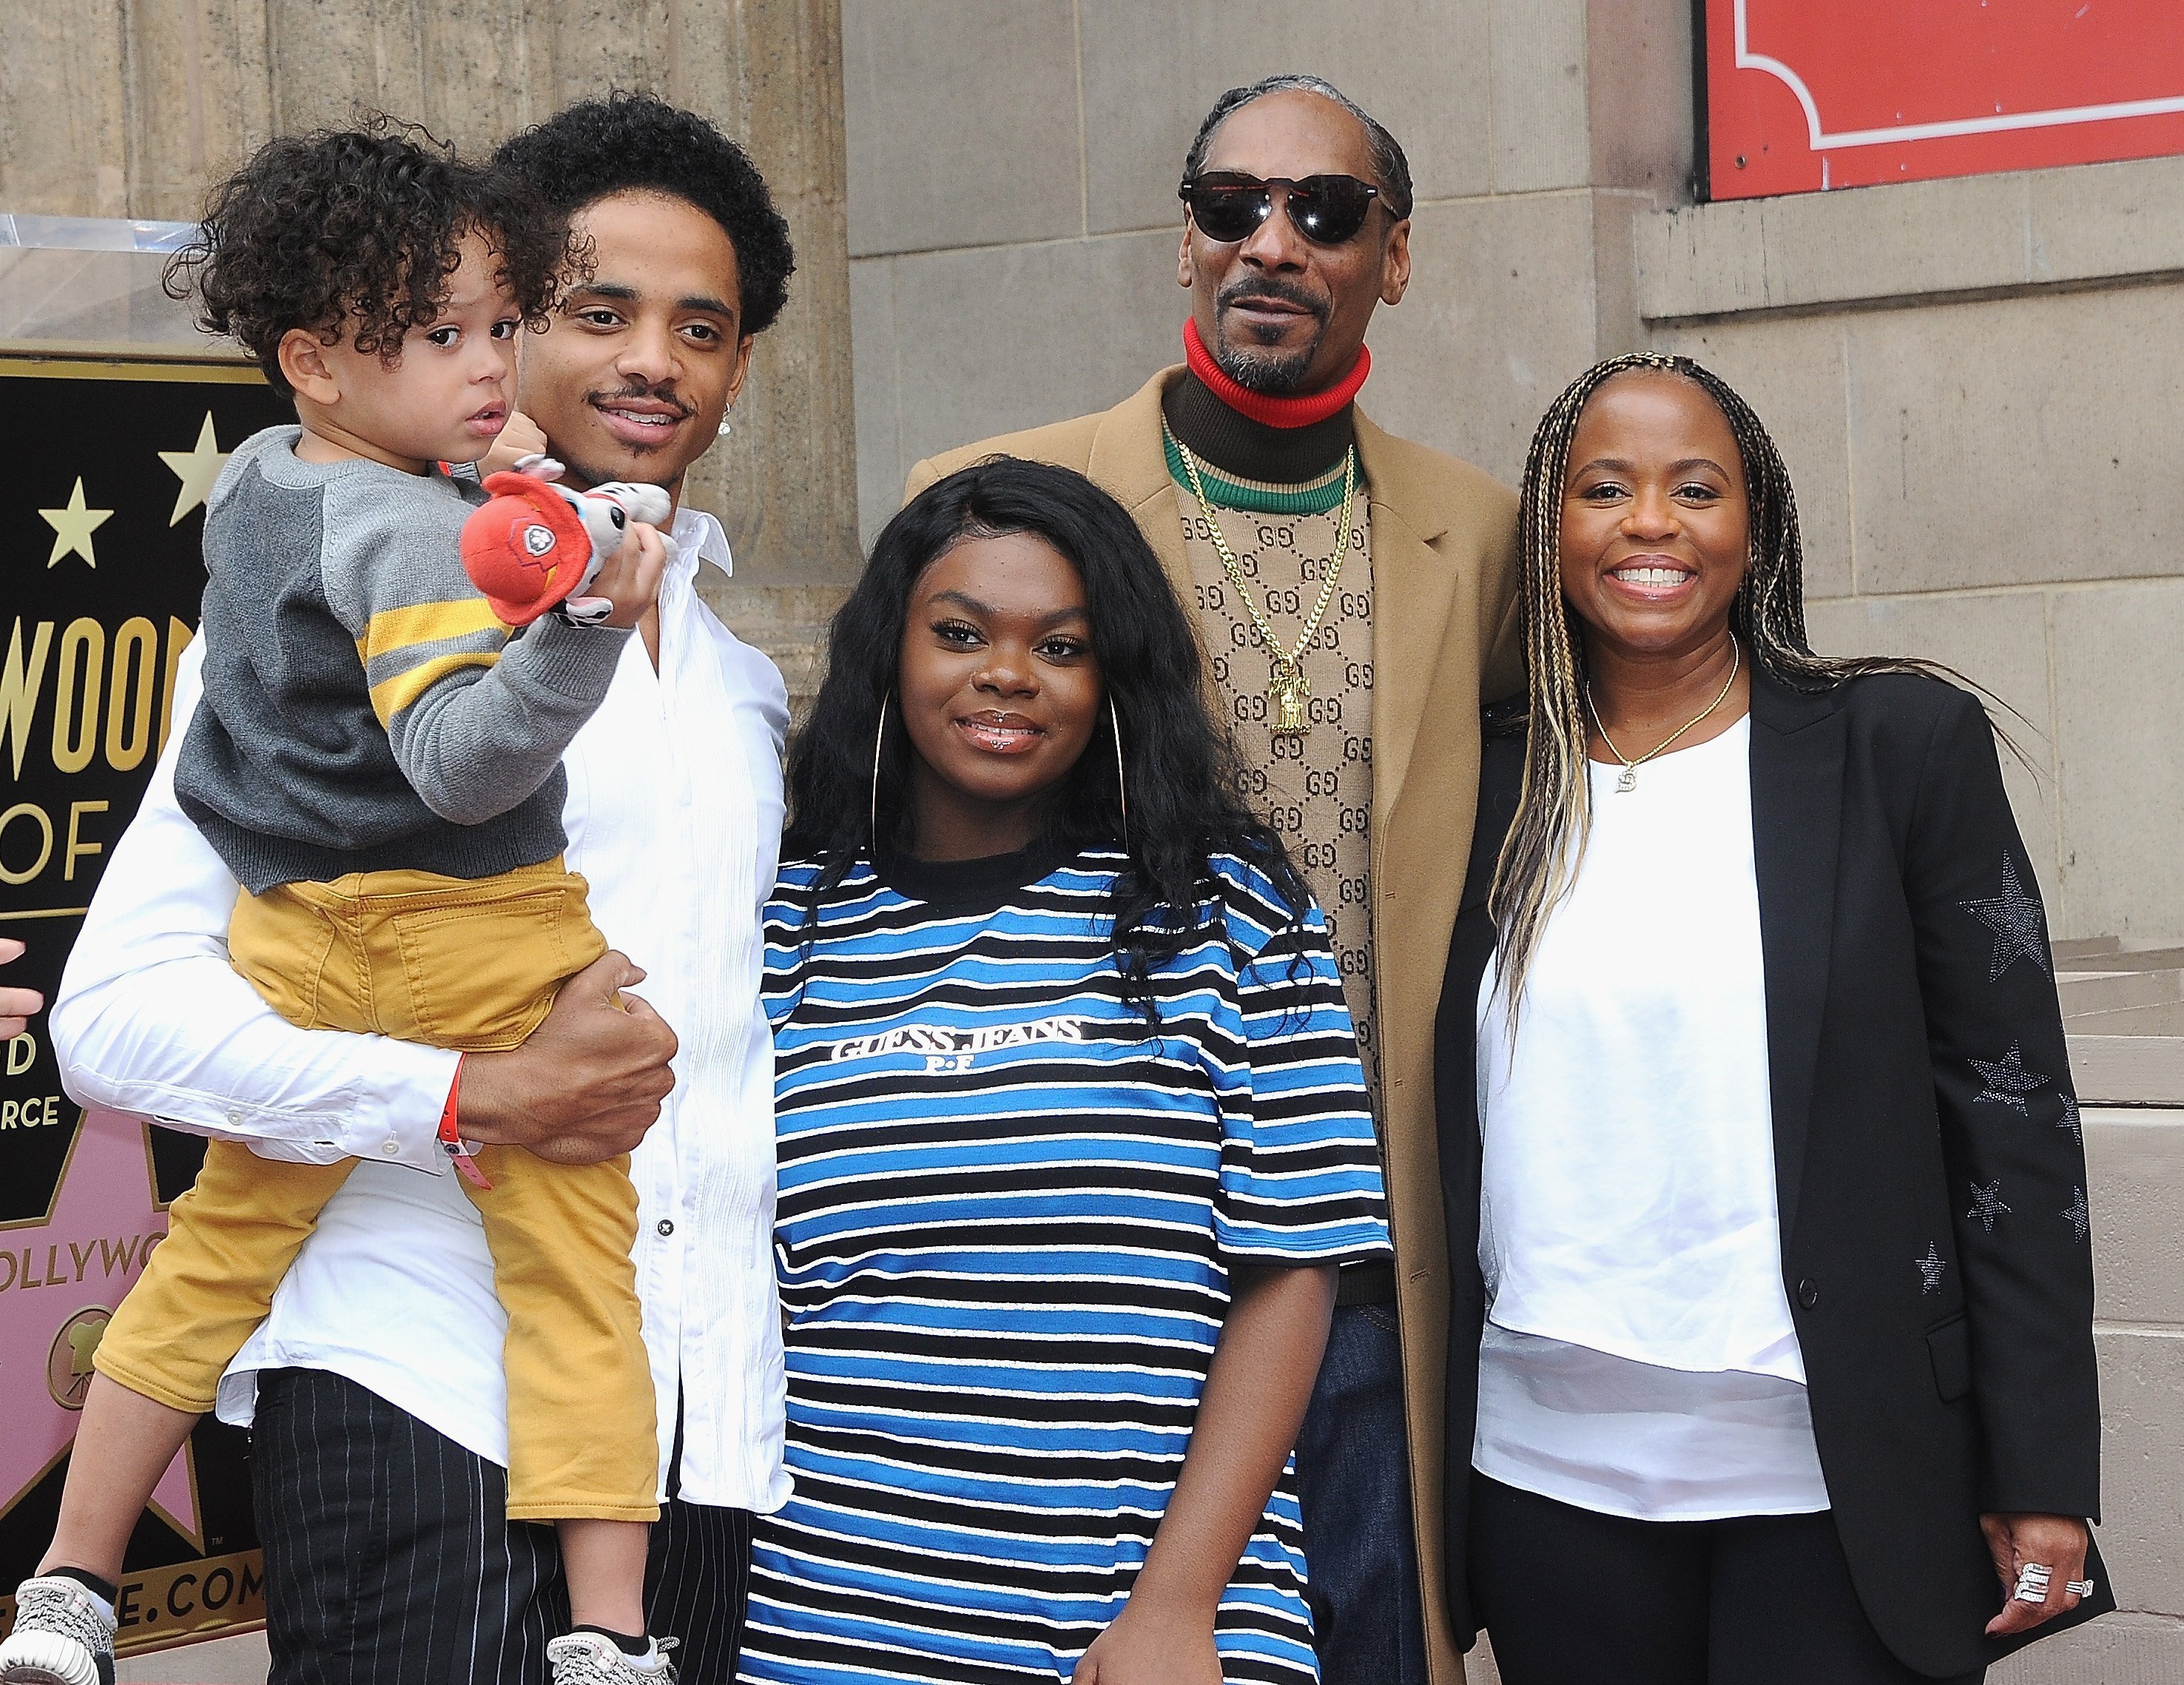 Snoop Dogg and Shante Taylor with family attends Snoop Dogg's star ceremony on The Hollywood Walk of Fame held on November 19, 2018 | Photo: Getty Images